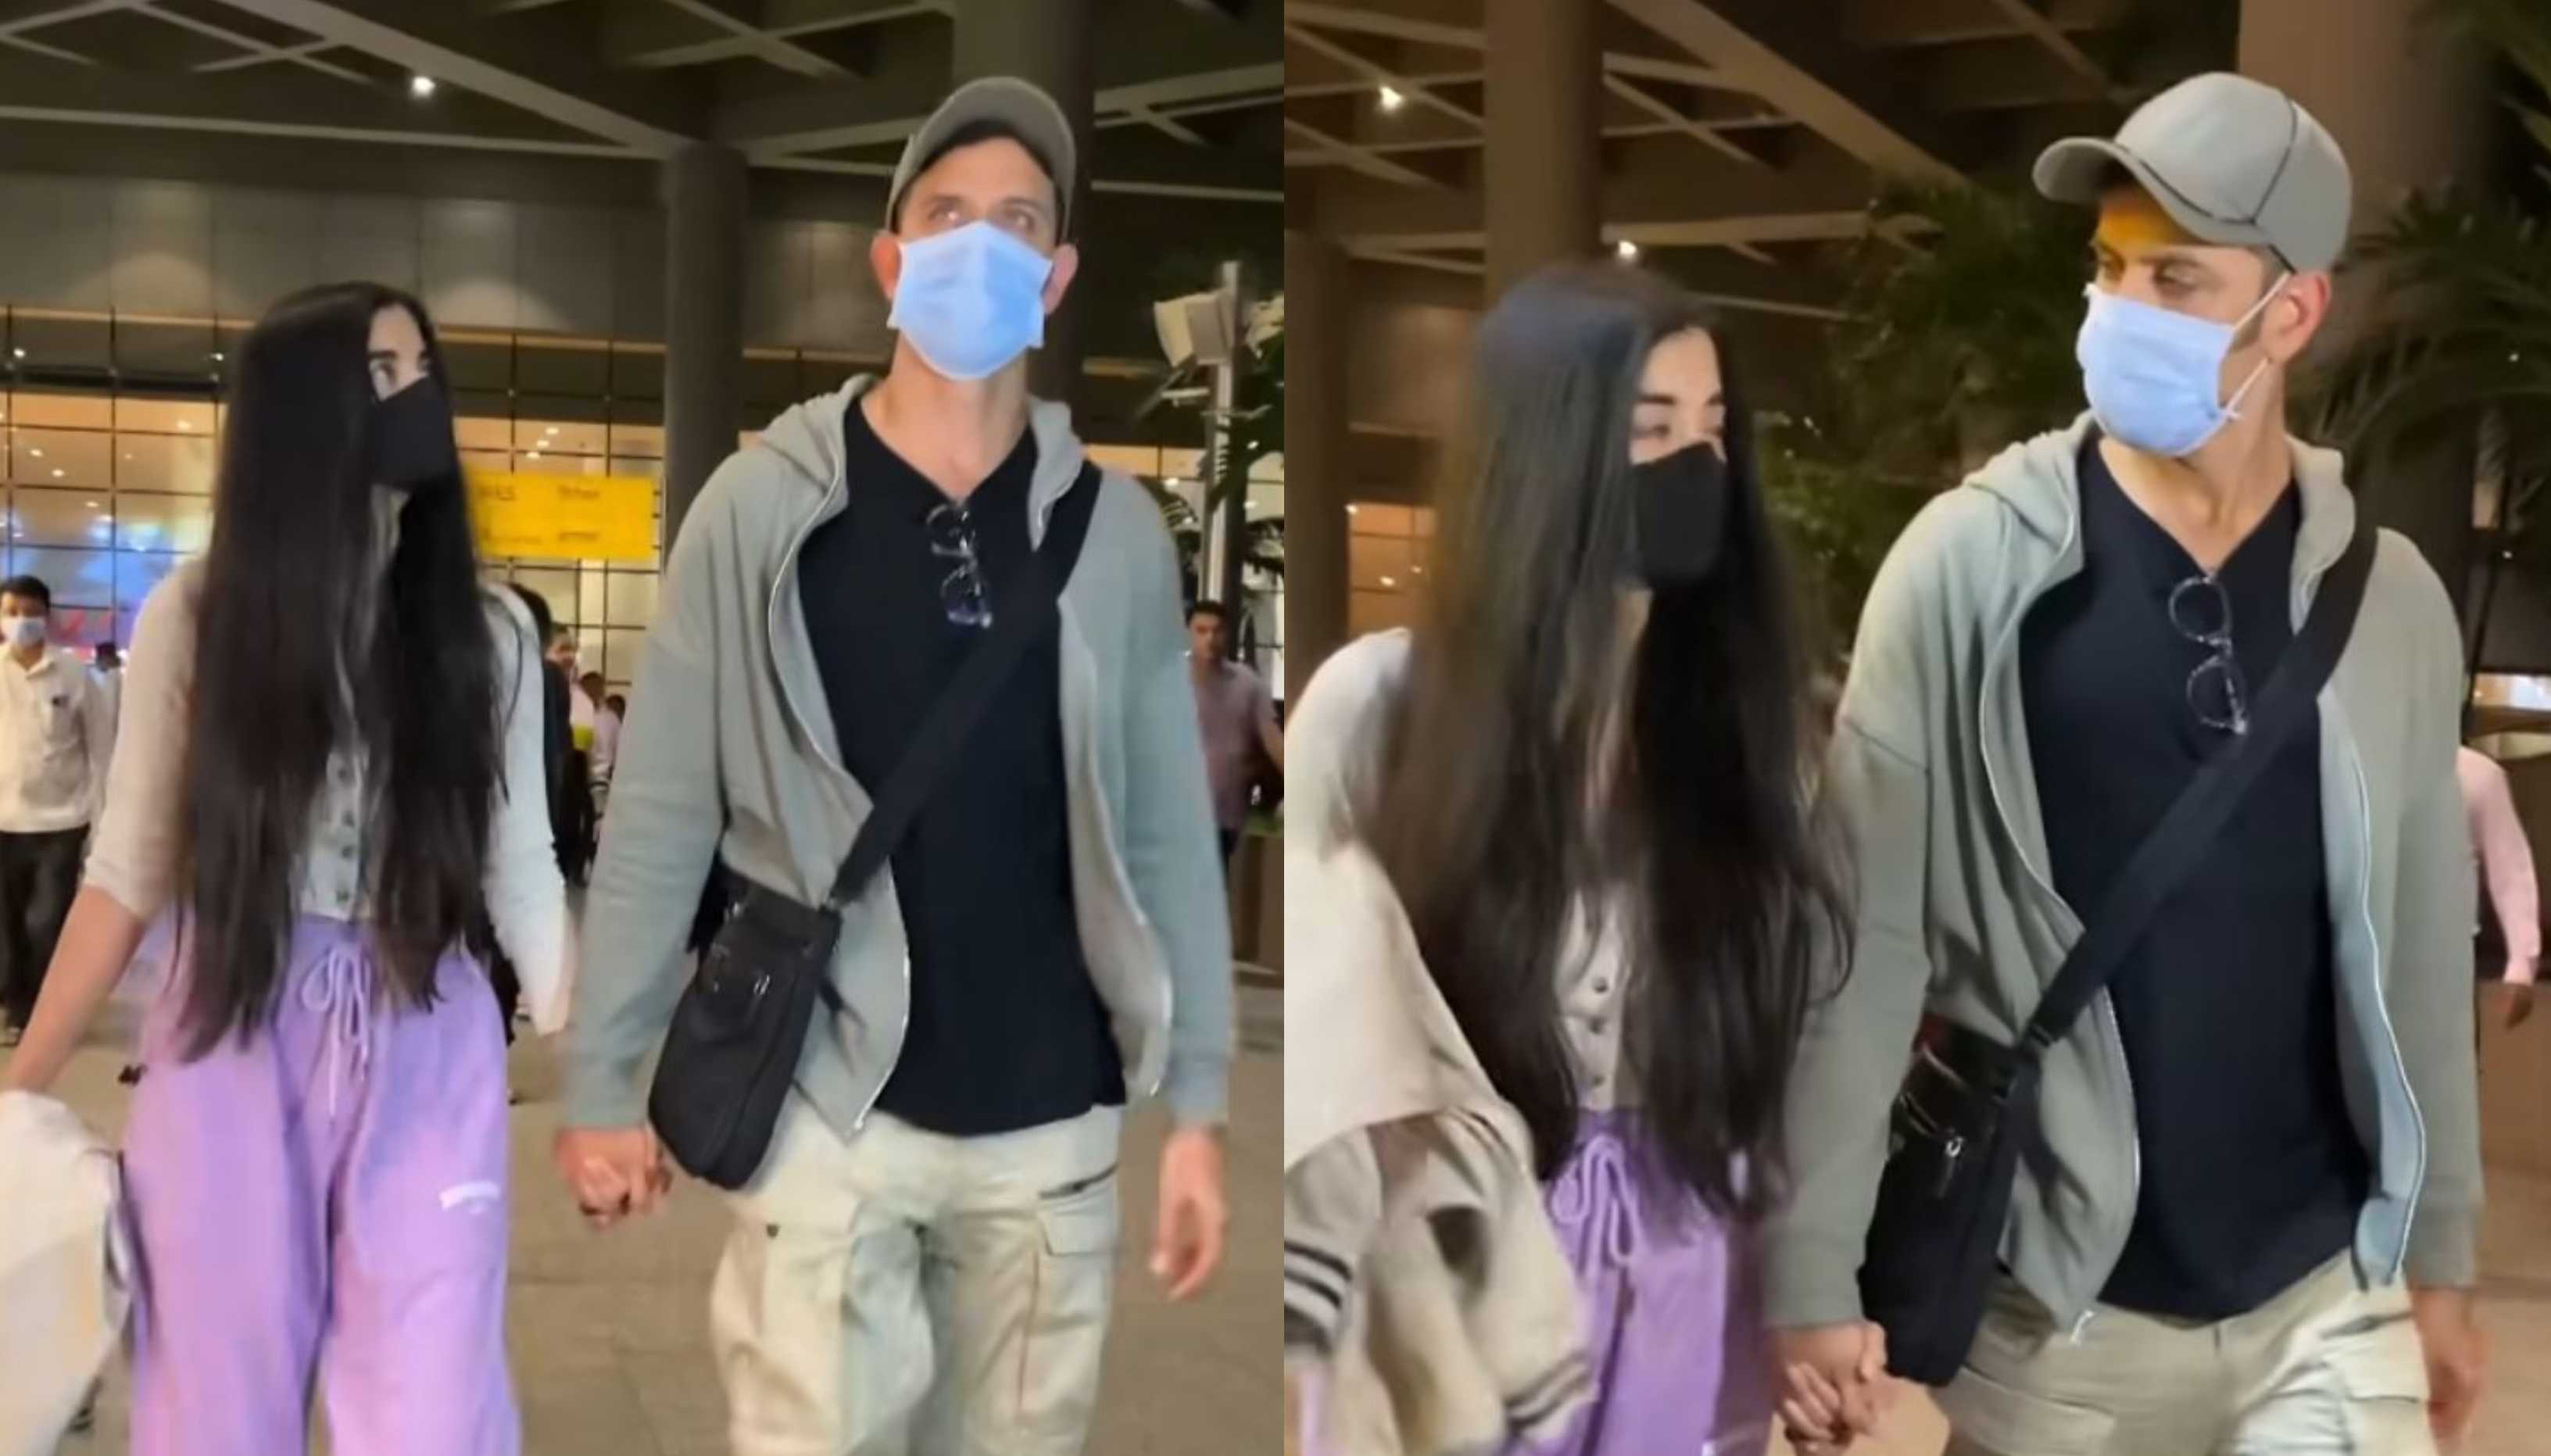 Hrithik Roshan and Saba Azad return from their exotic holiday hand in hand; are they planning to tie the knot soon?